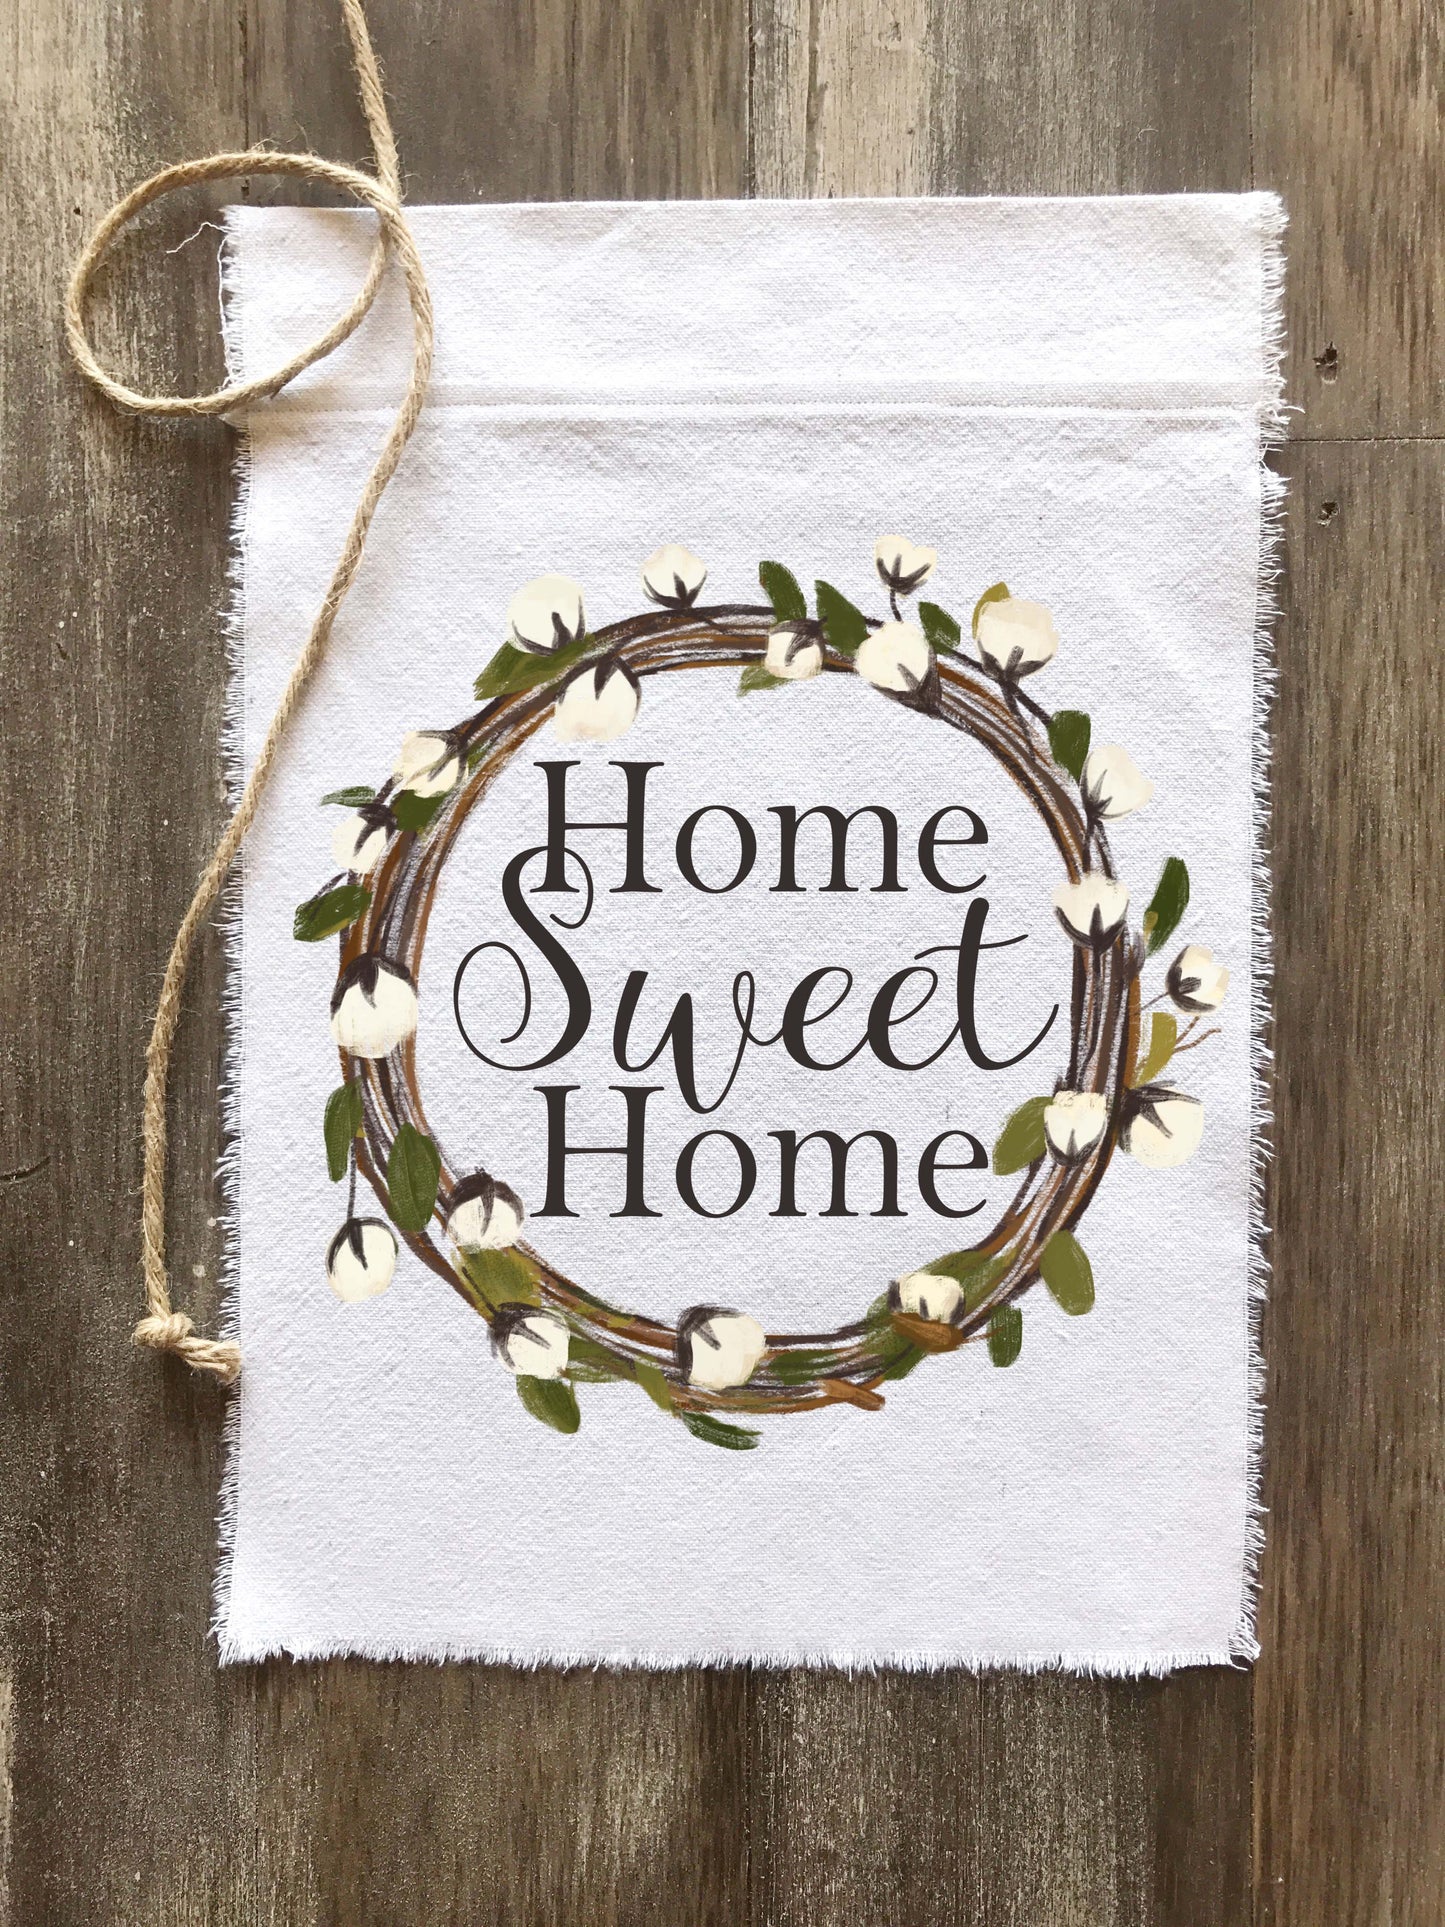 Home Sweet Home Cotton Wreath Canvas Banner Flag - Returning Grace Designs